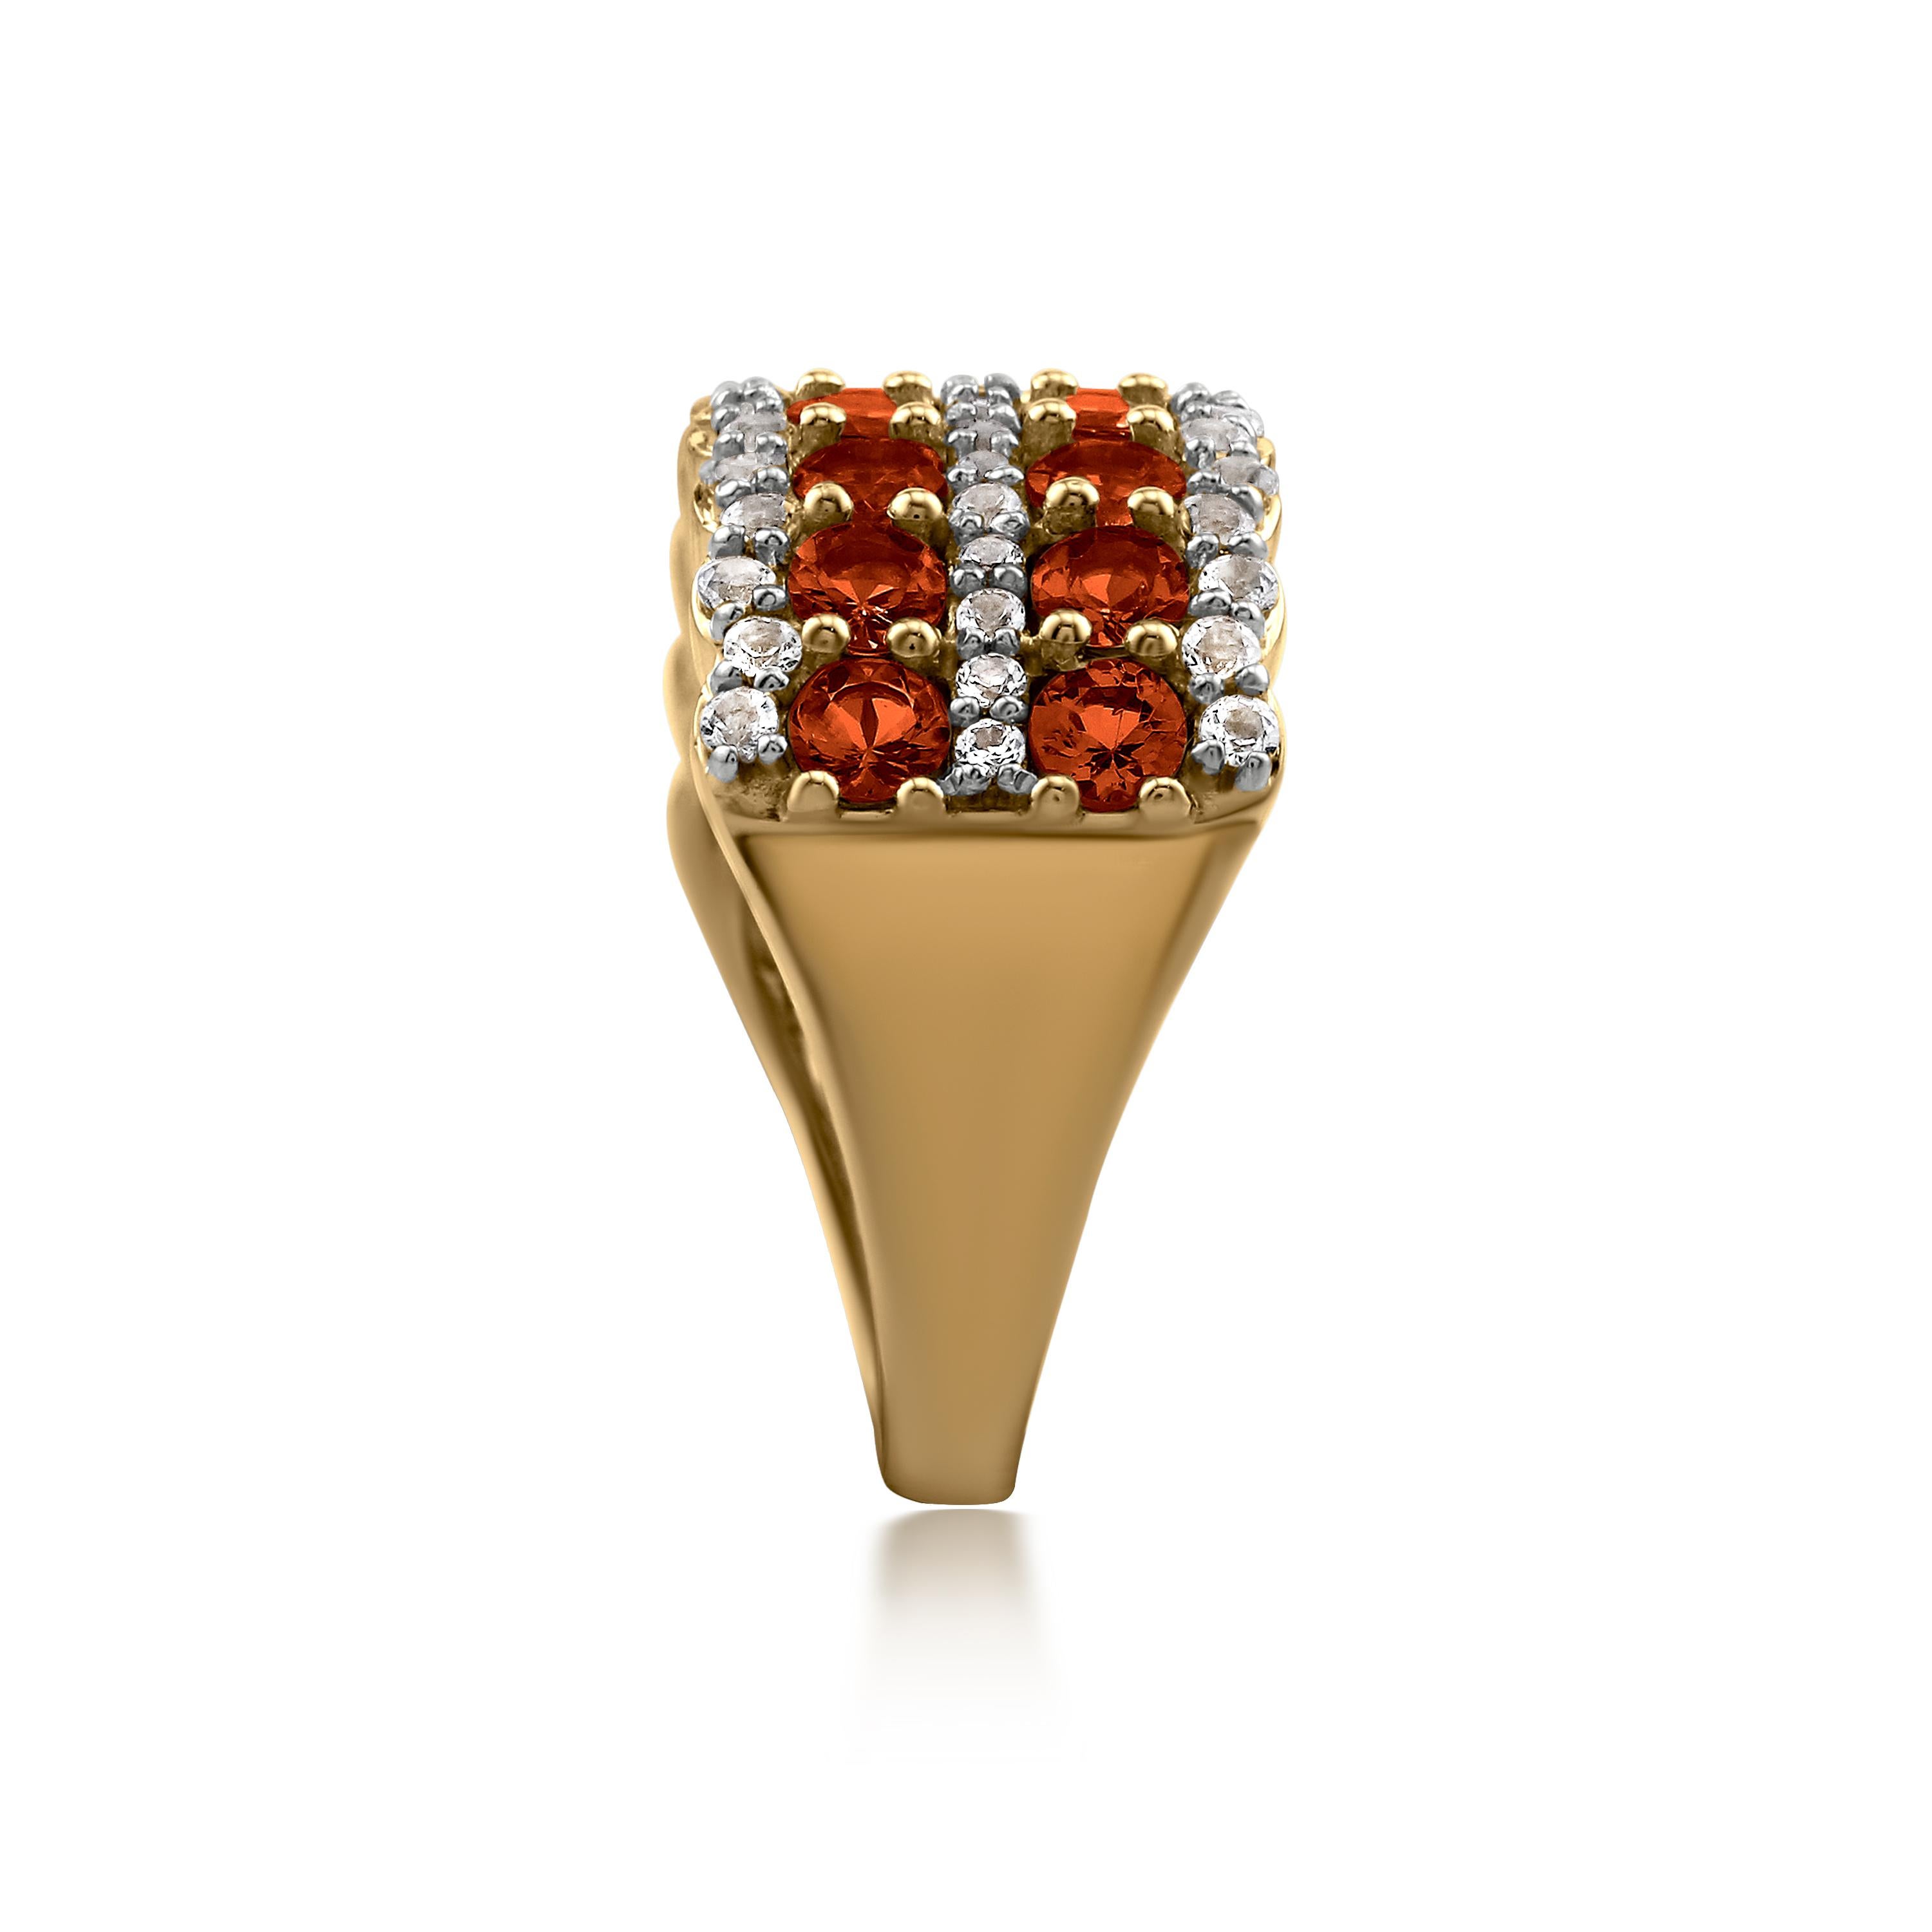 When it comes to your jewelry collection, the dazzling double-row design of this Gemistry gemstone band ring is destined for greatness. This dome-shaped eternity band ring features two rows of prong-set 1.45 carat  Fire Opal accented on each end and